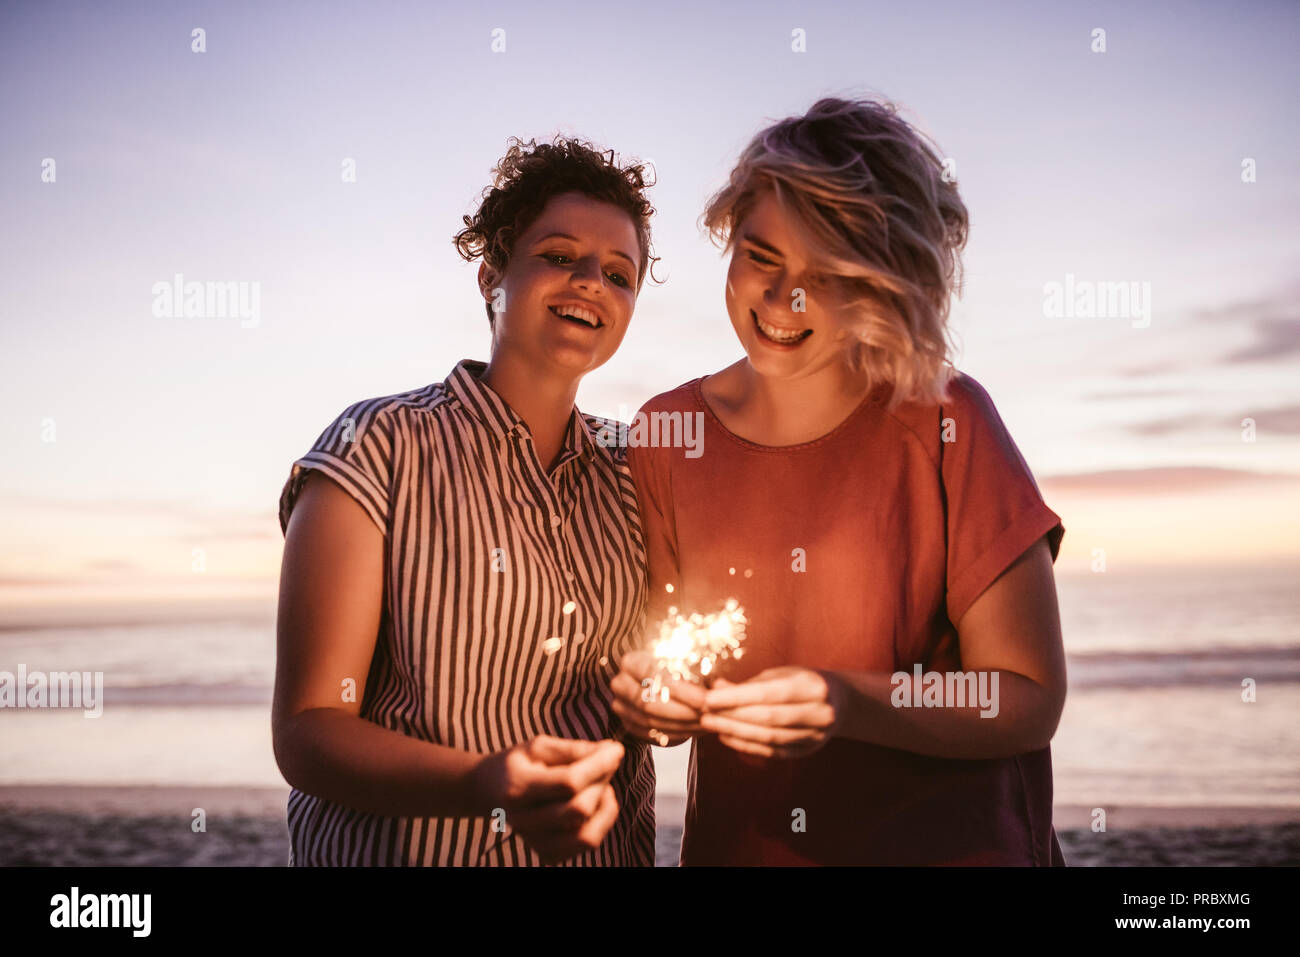 Laughing female friends playing with sparklers during a beach sunset Stock Photo